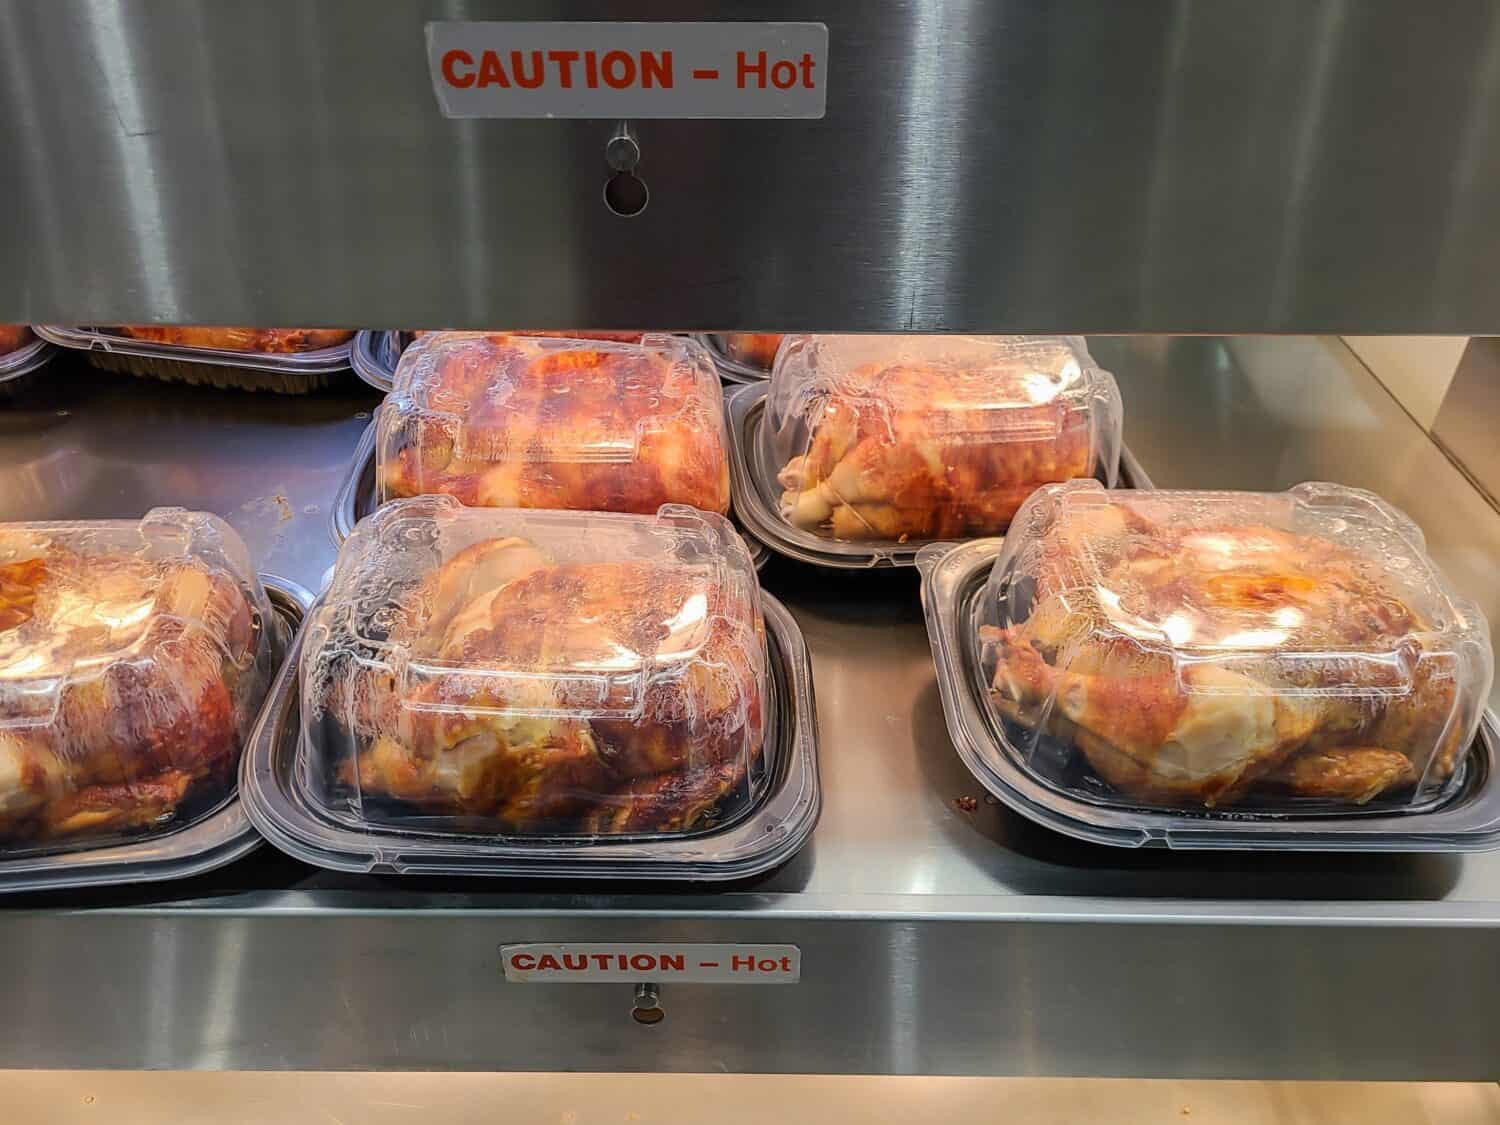 Rotisserie chickens for sale at a Costco store. A sign is visible on the chickens to inform customers that they are hot.